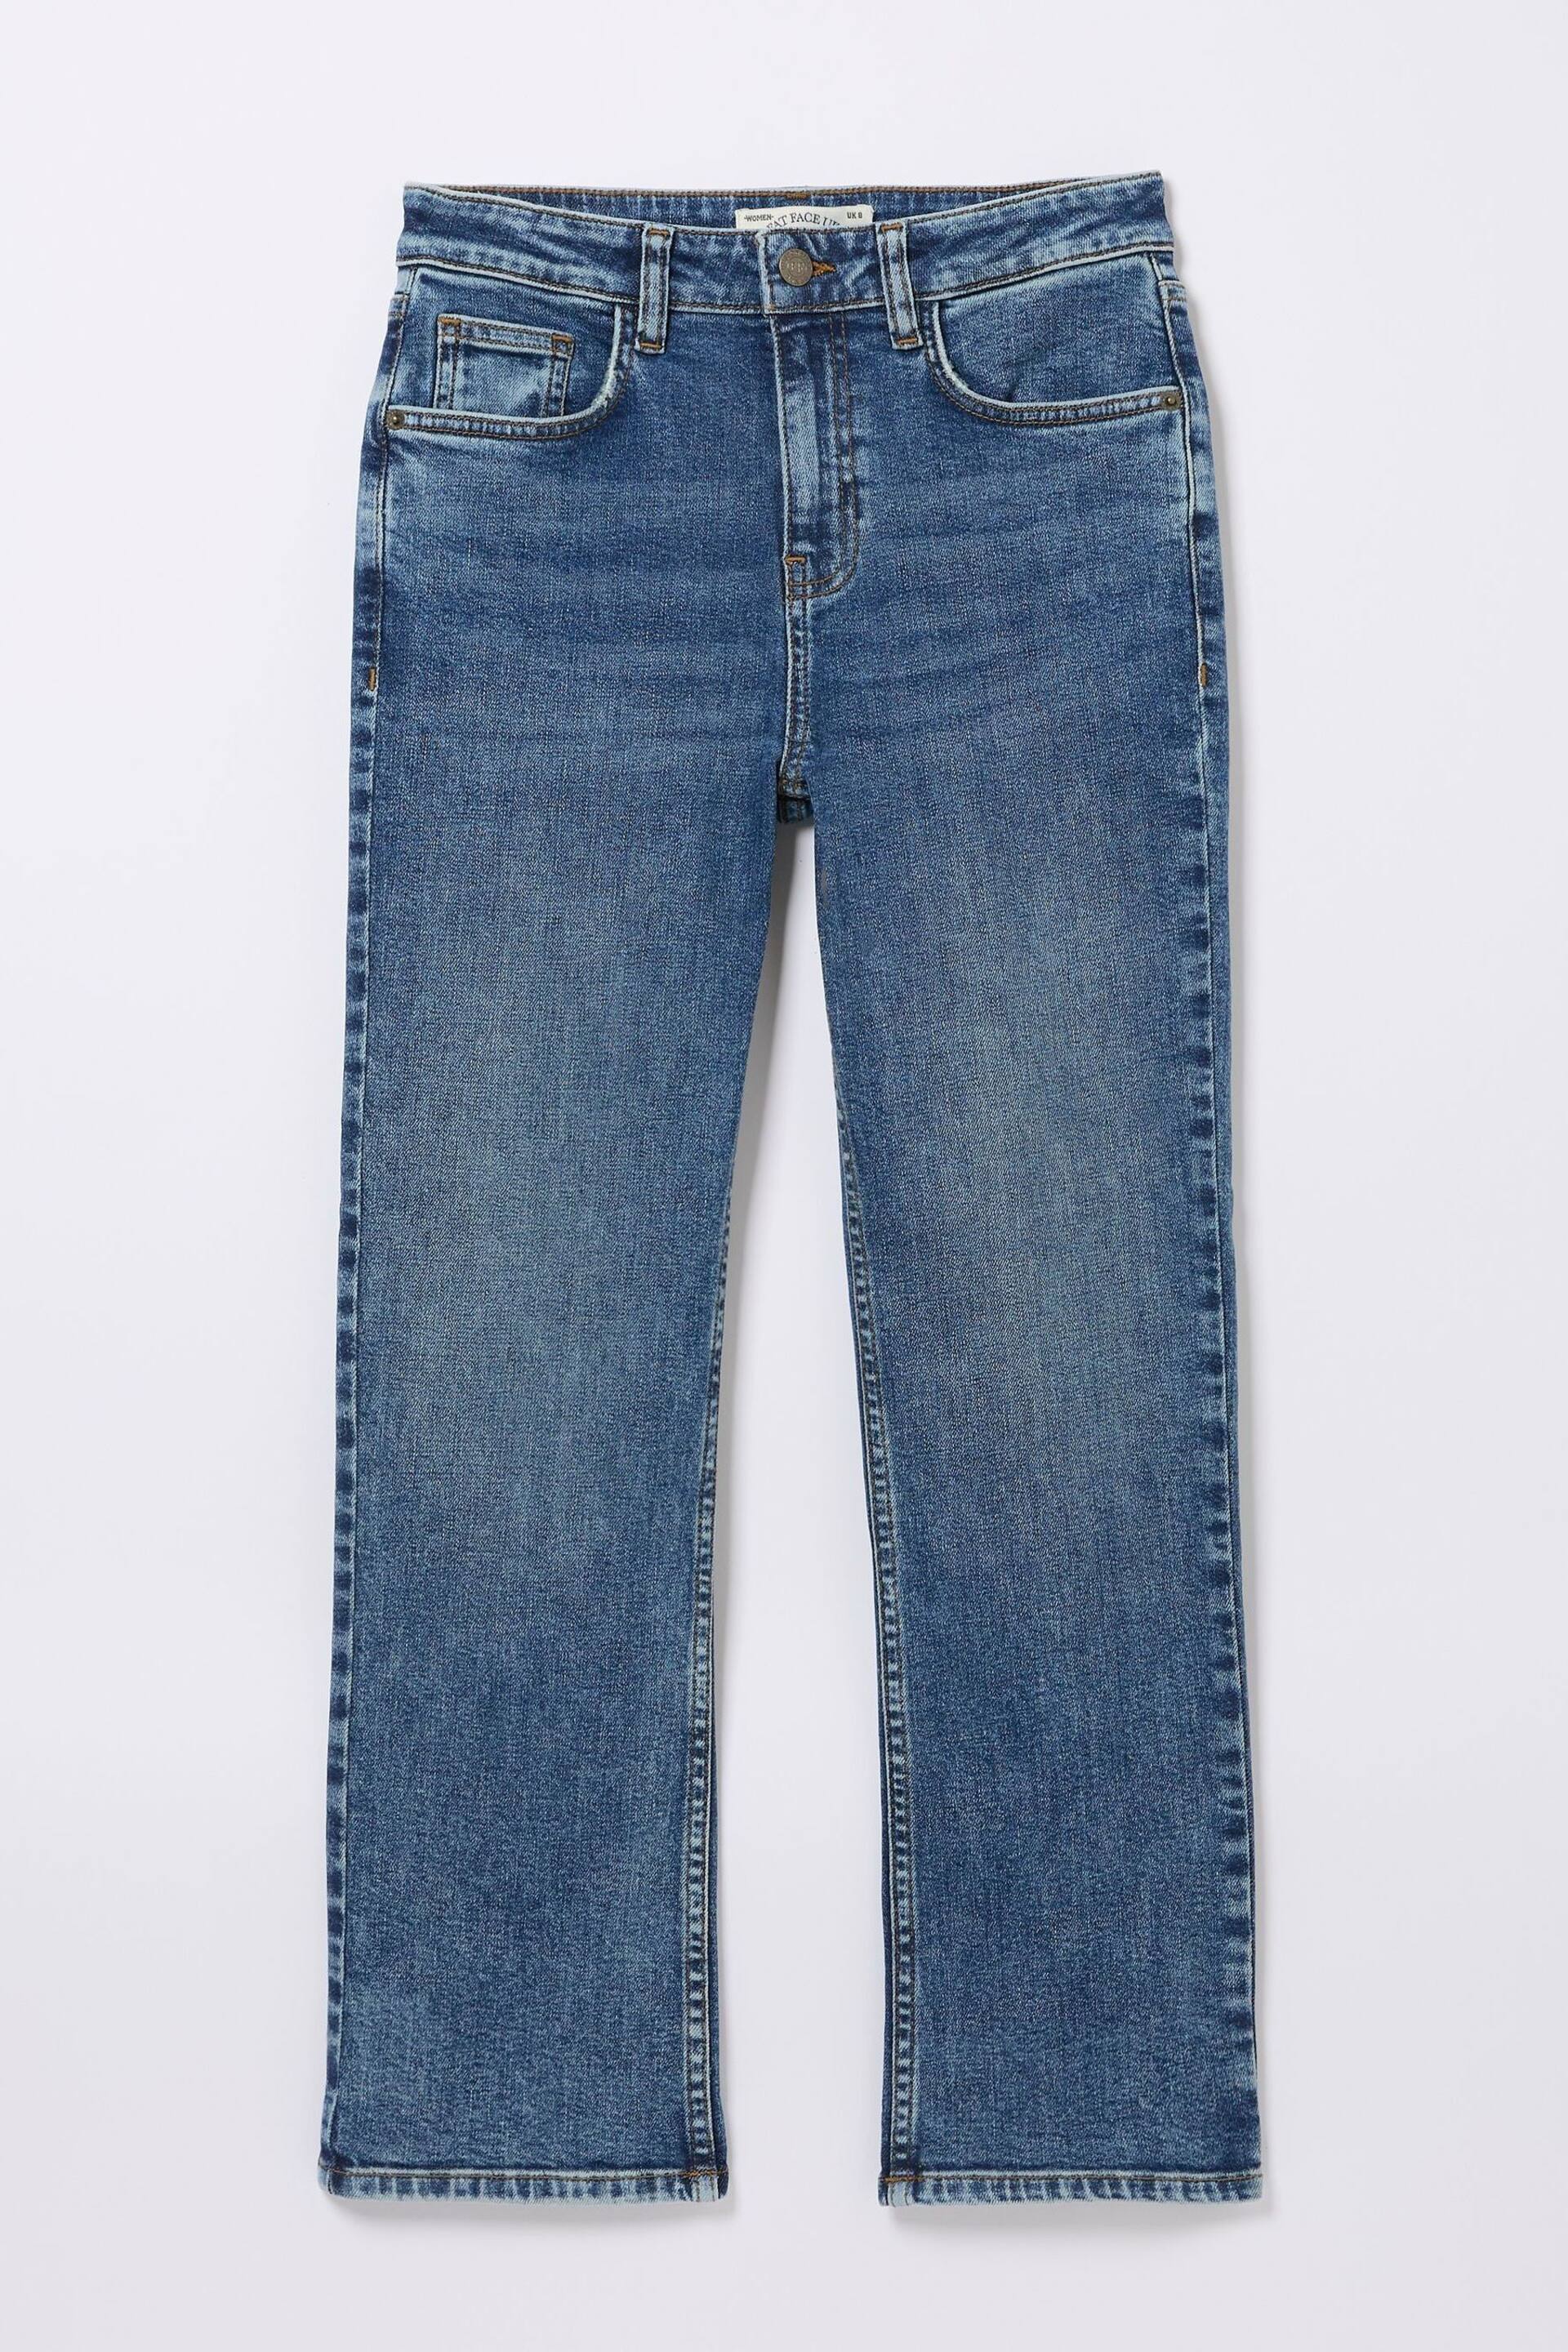 FatFace Blue Capri Sway Cropped Jeans - Image 5 of 5